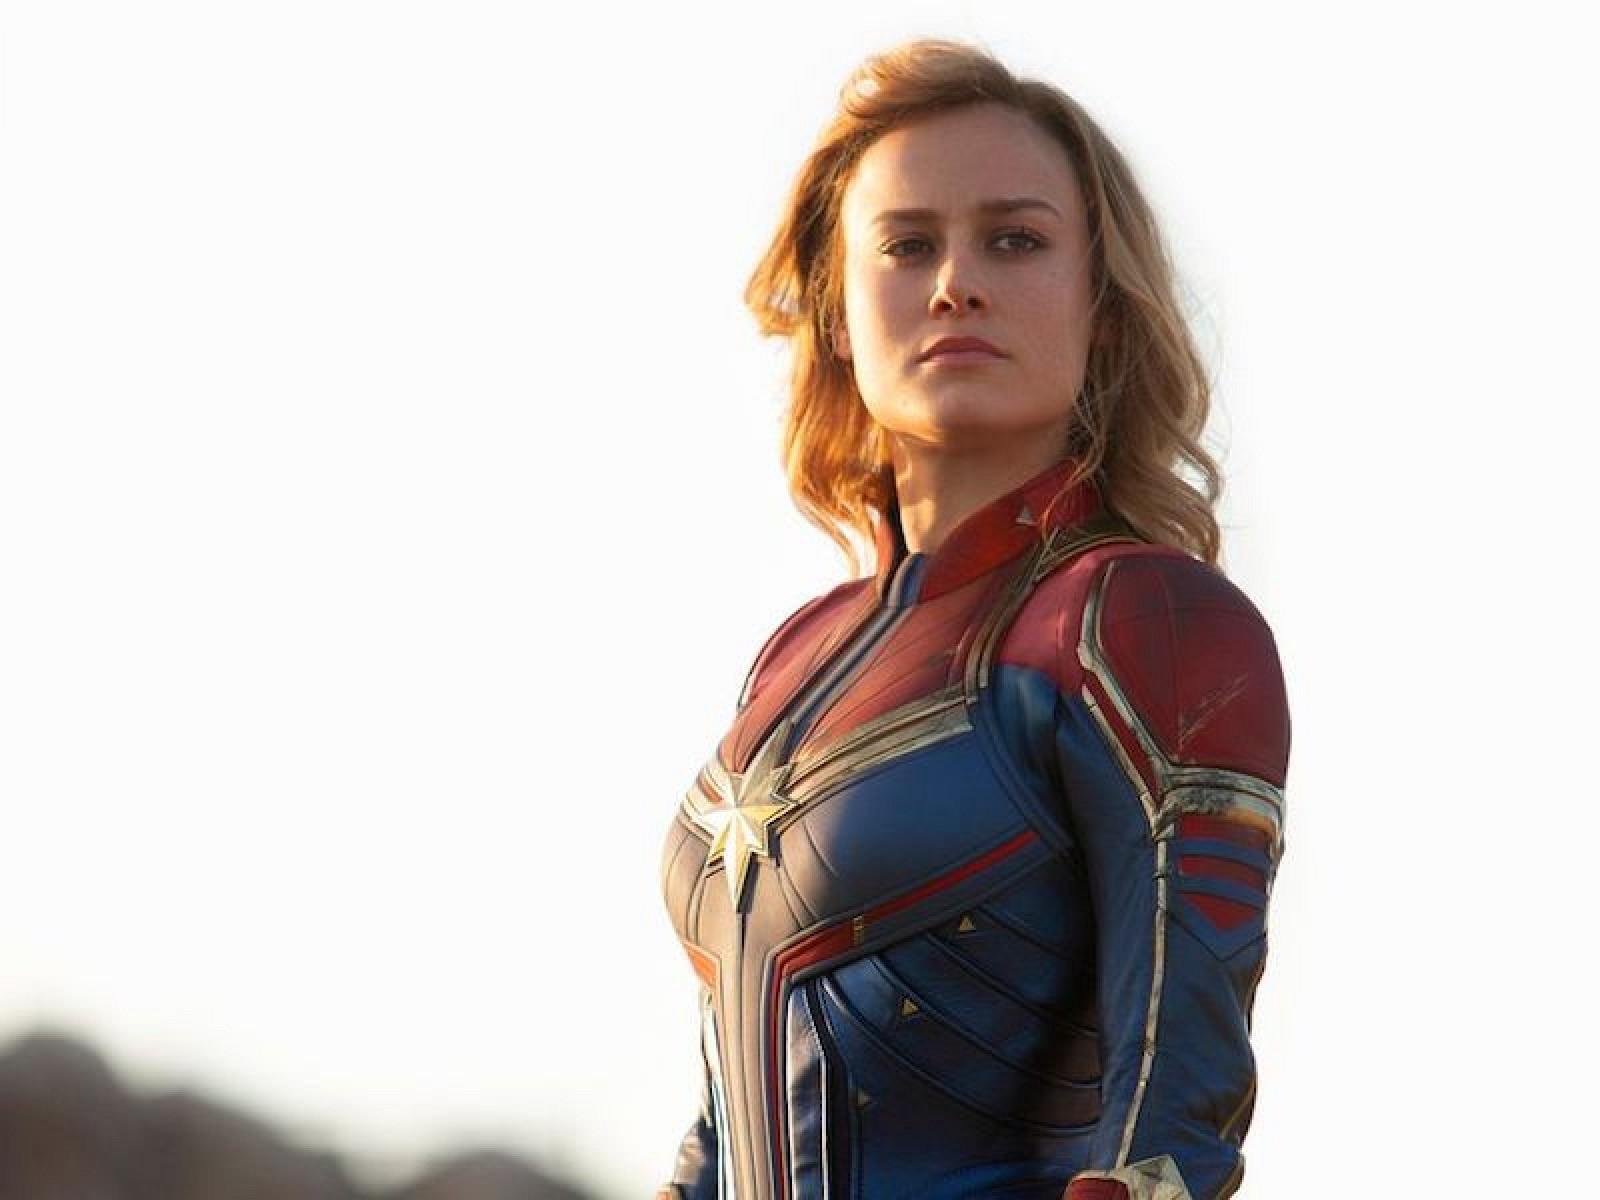 Captain Marvel's Brie Larson to Star as Undercover CIA Operative